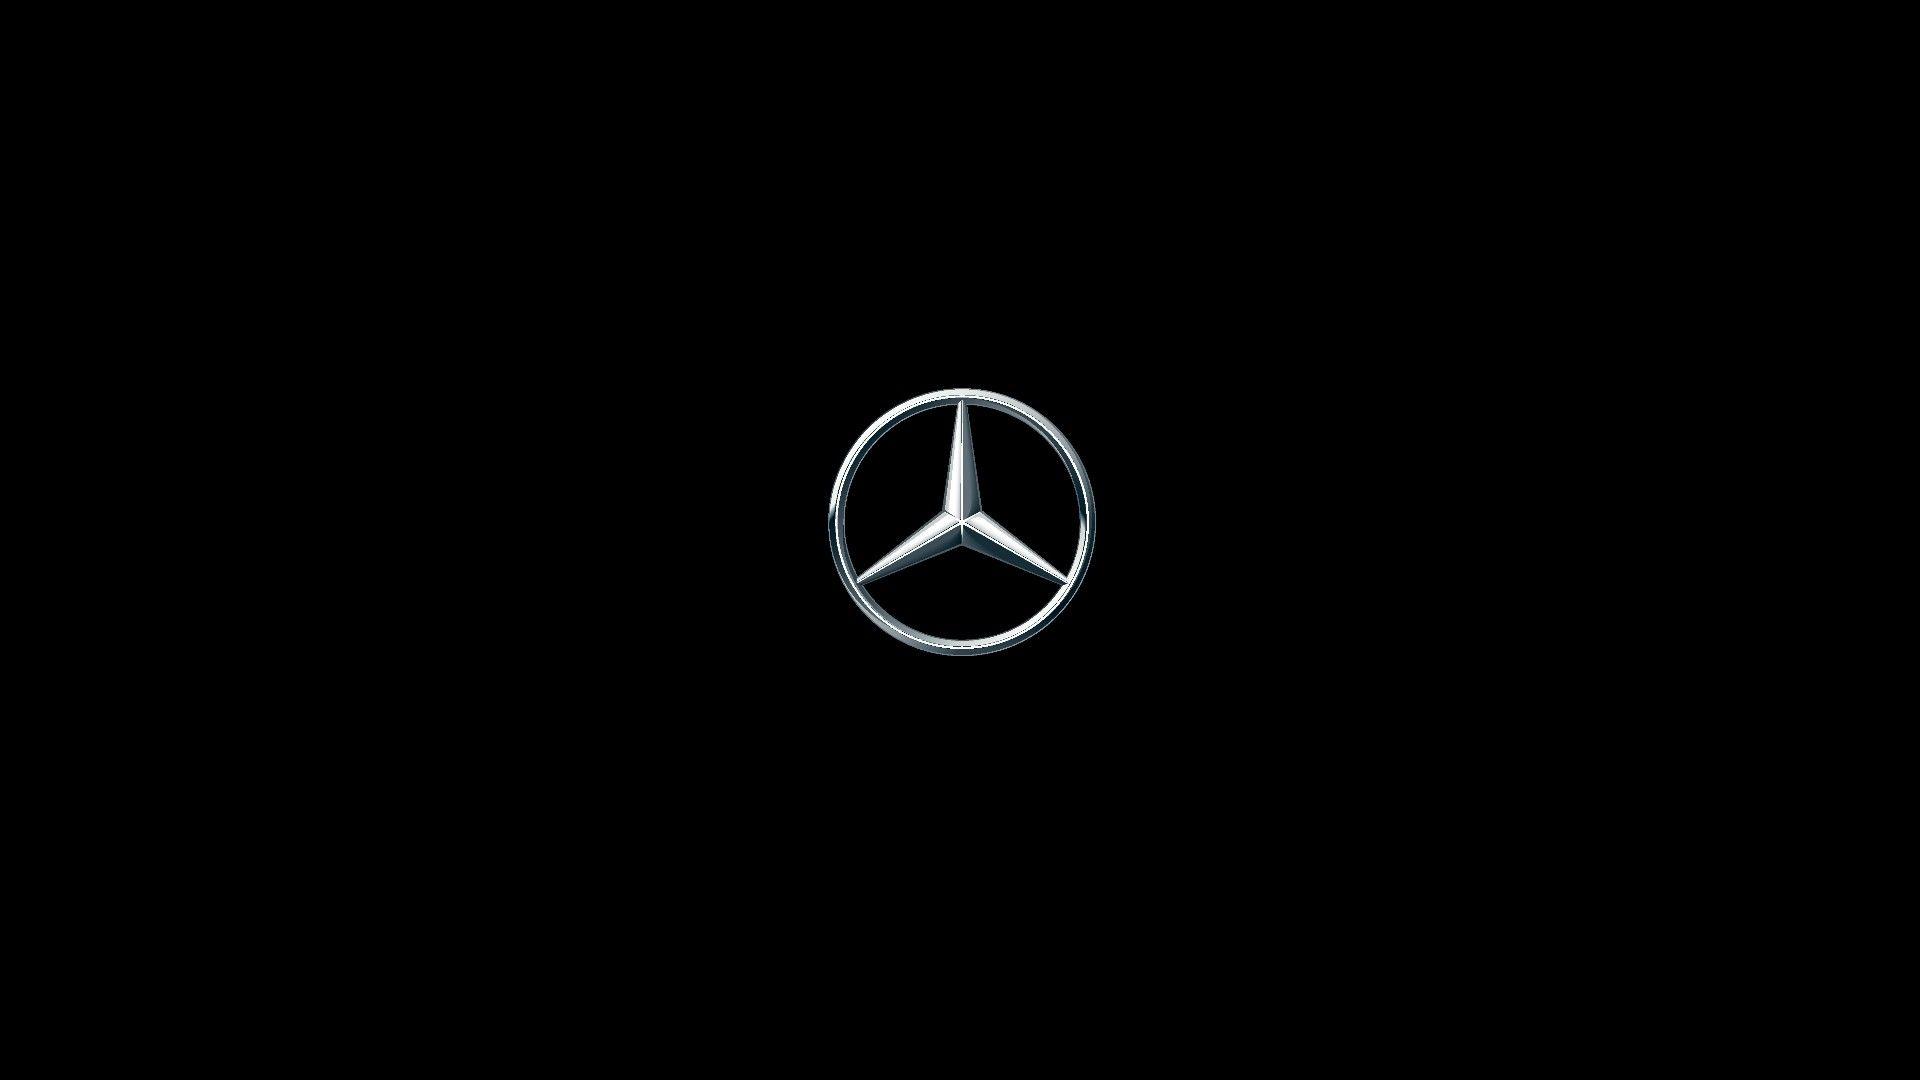 Lovely Mercedes Benz Logo Wallpapers Pictures Image – Homemaison